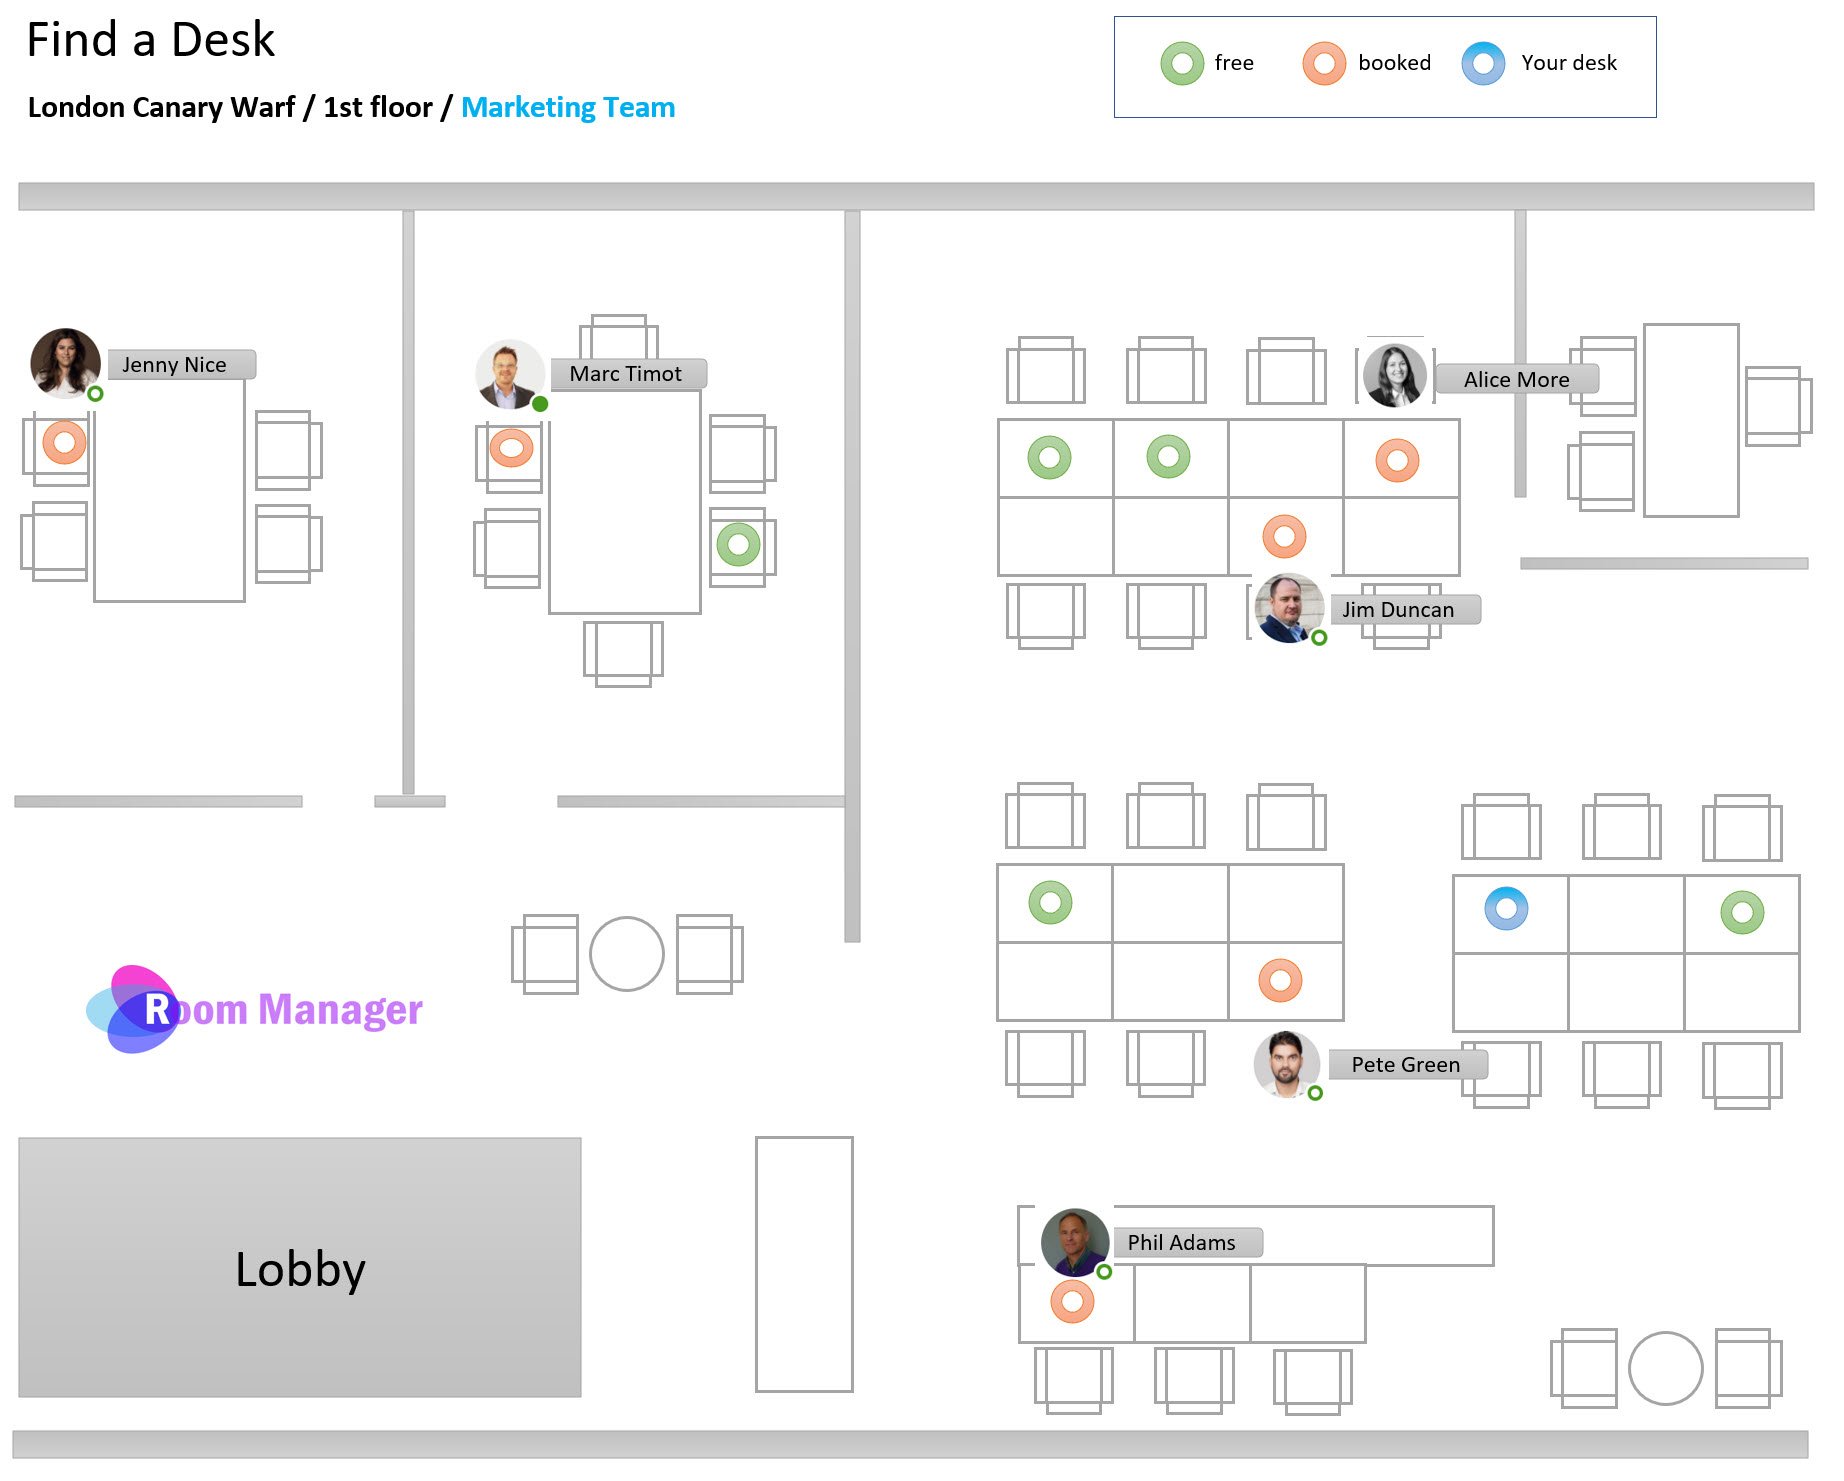 Plan Interactive Desk Management Search people